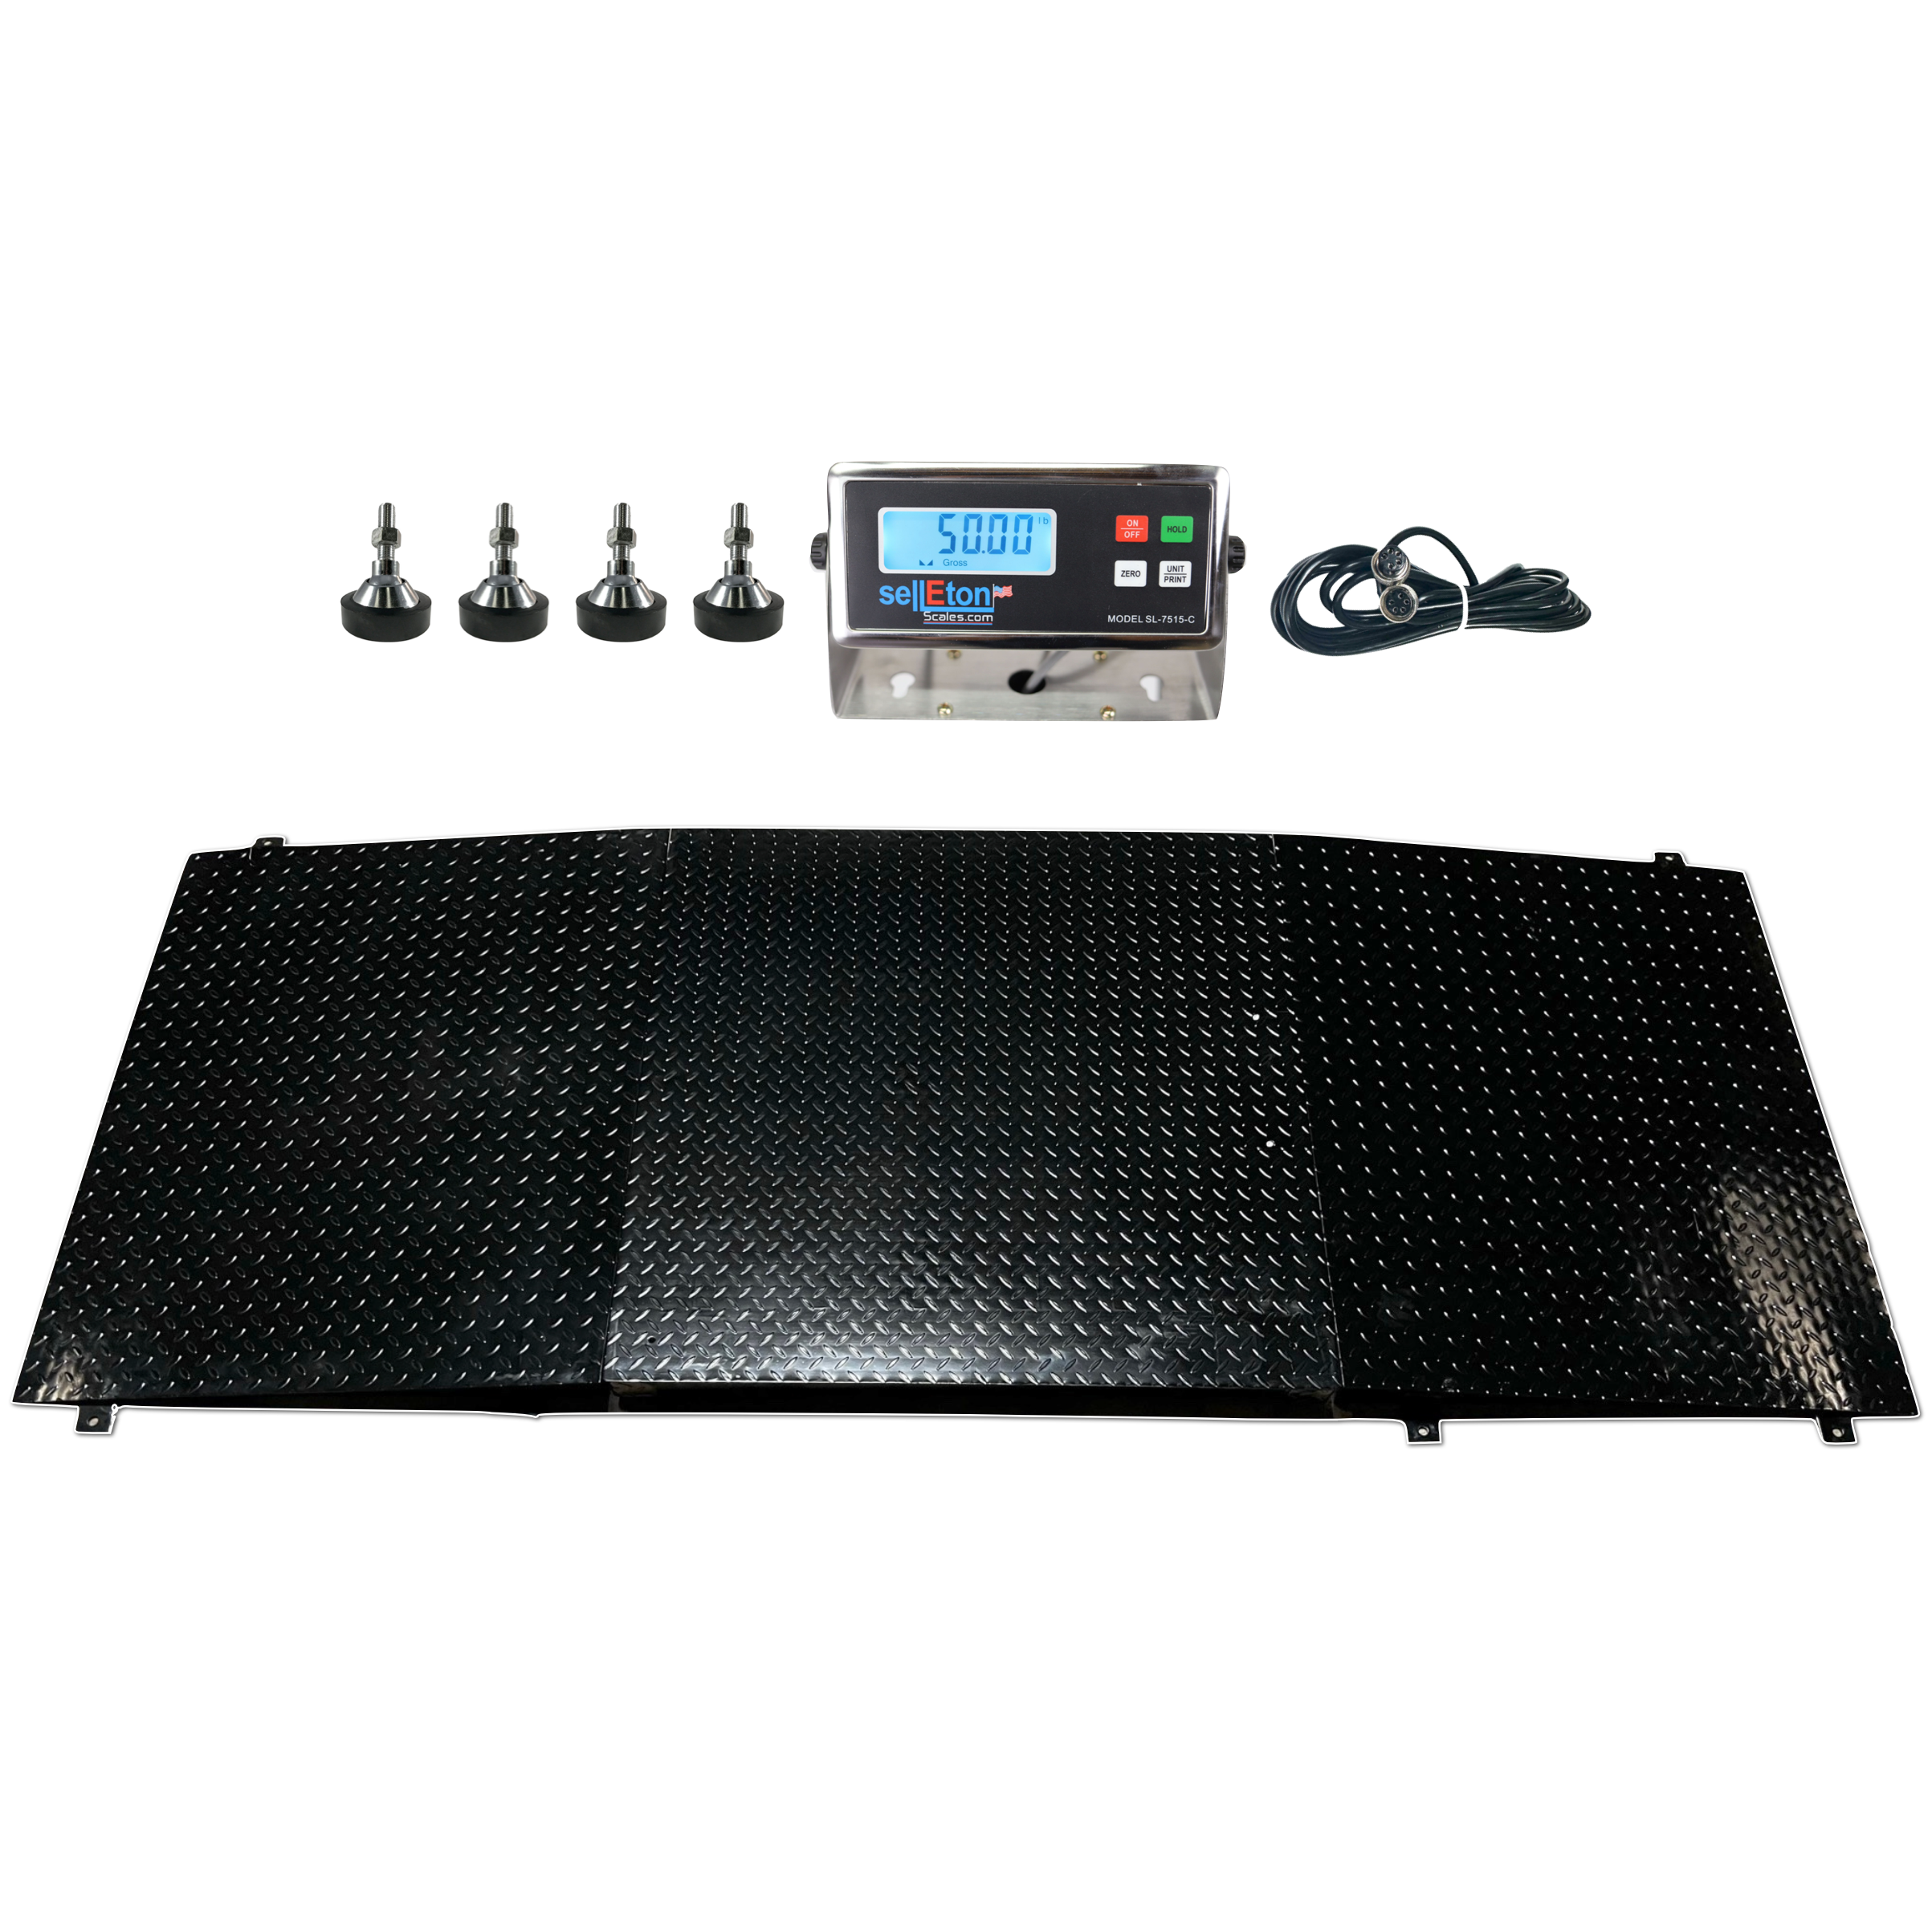 Prime Floor Scale 40x40 10,000 lb with Indicator